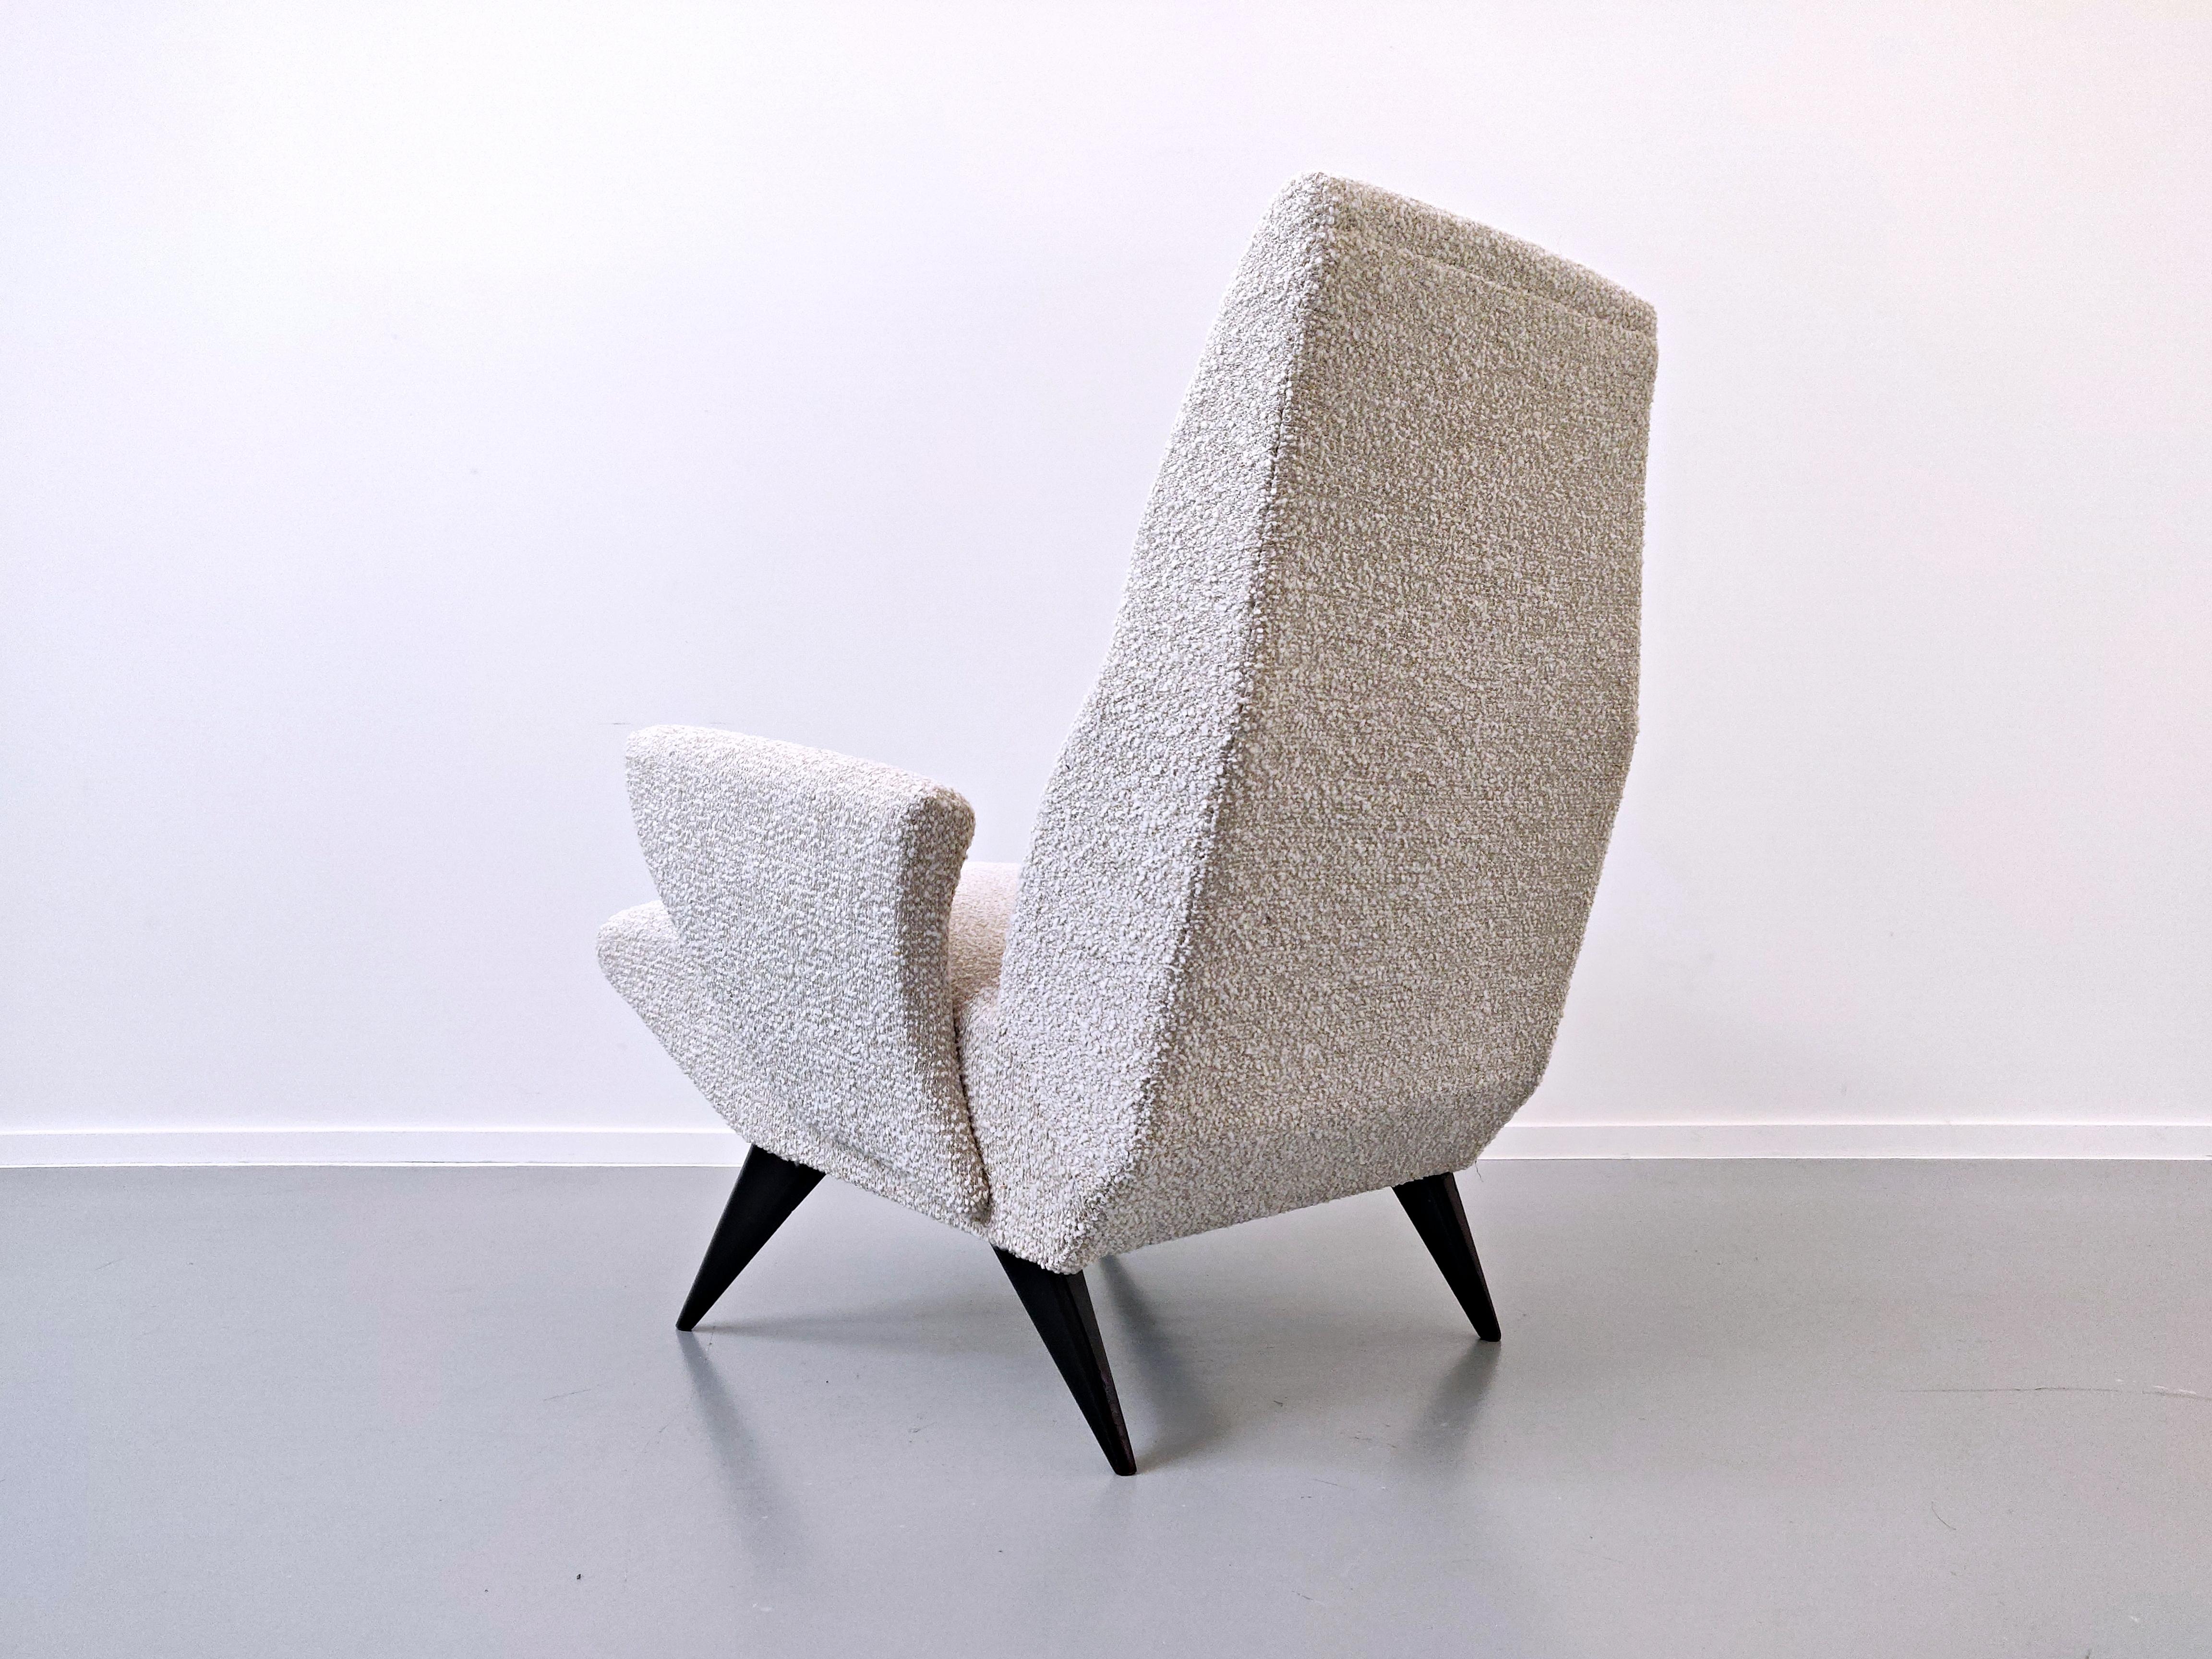 Textile Pair of Mid-Century Modern  Armchairs by Nino Zoncada for Frimar, Italy 